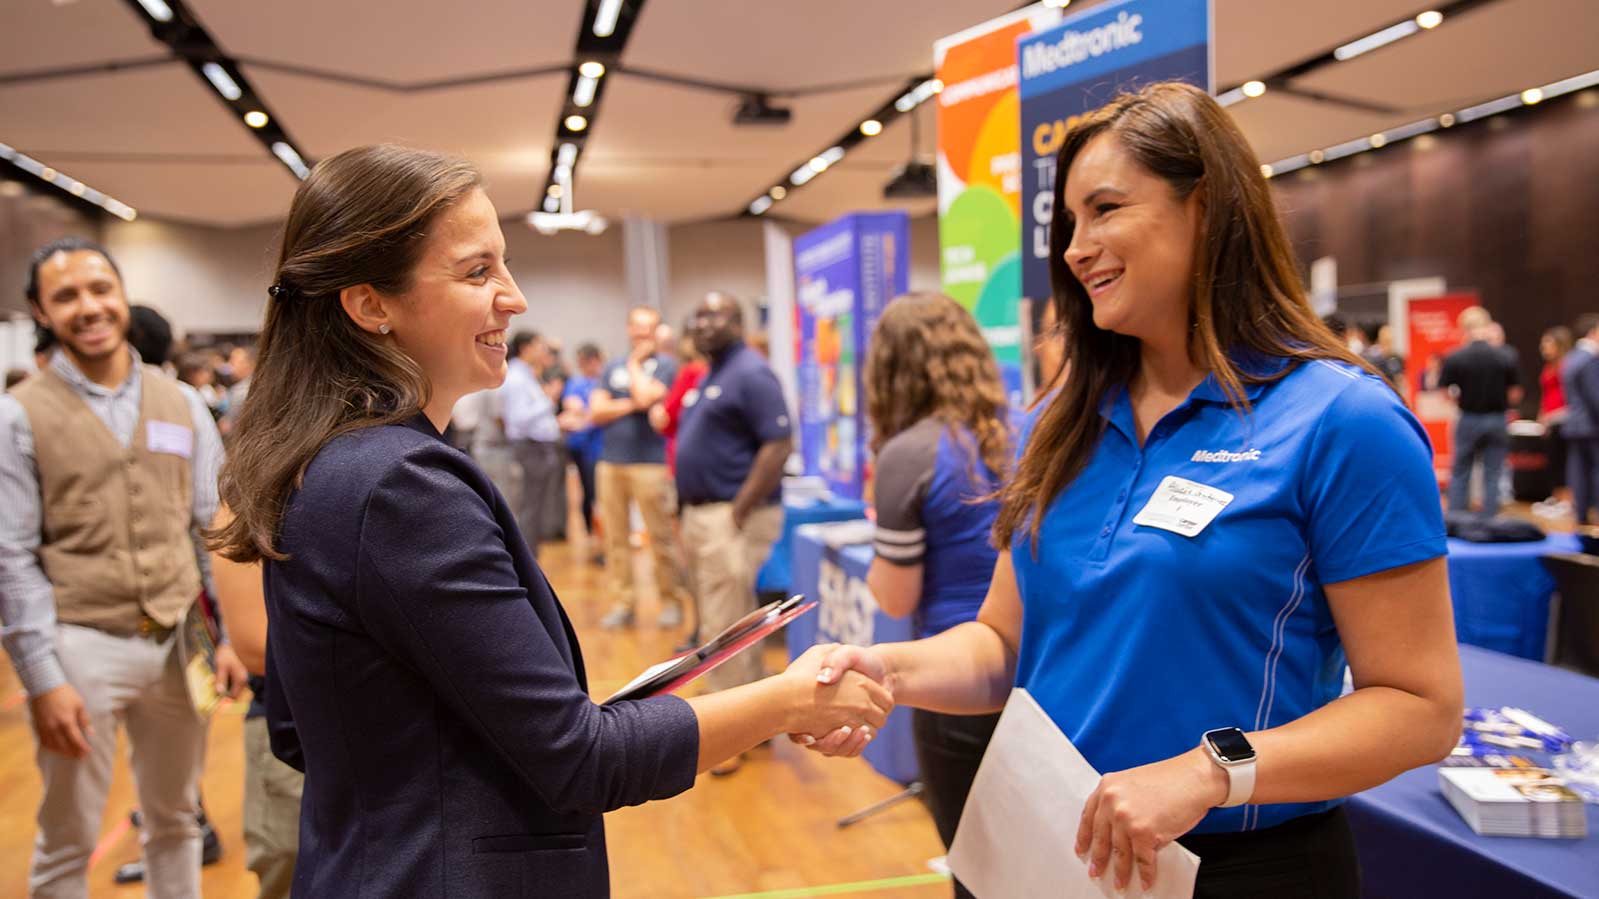 An employer and student shake hands and smile amidst the Fulton Schools Career Fair